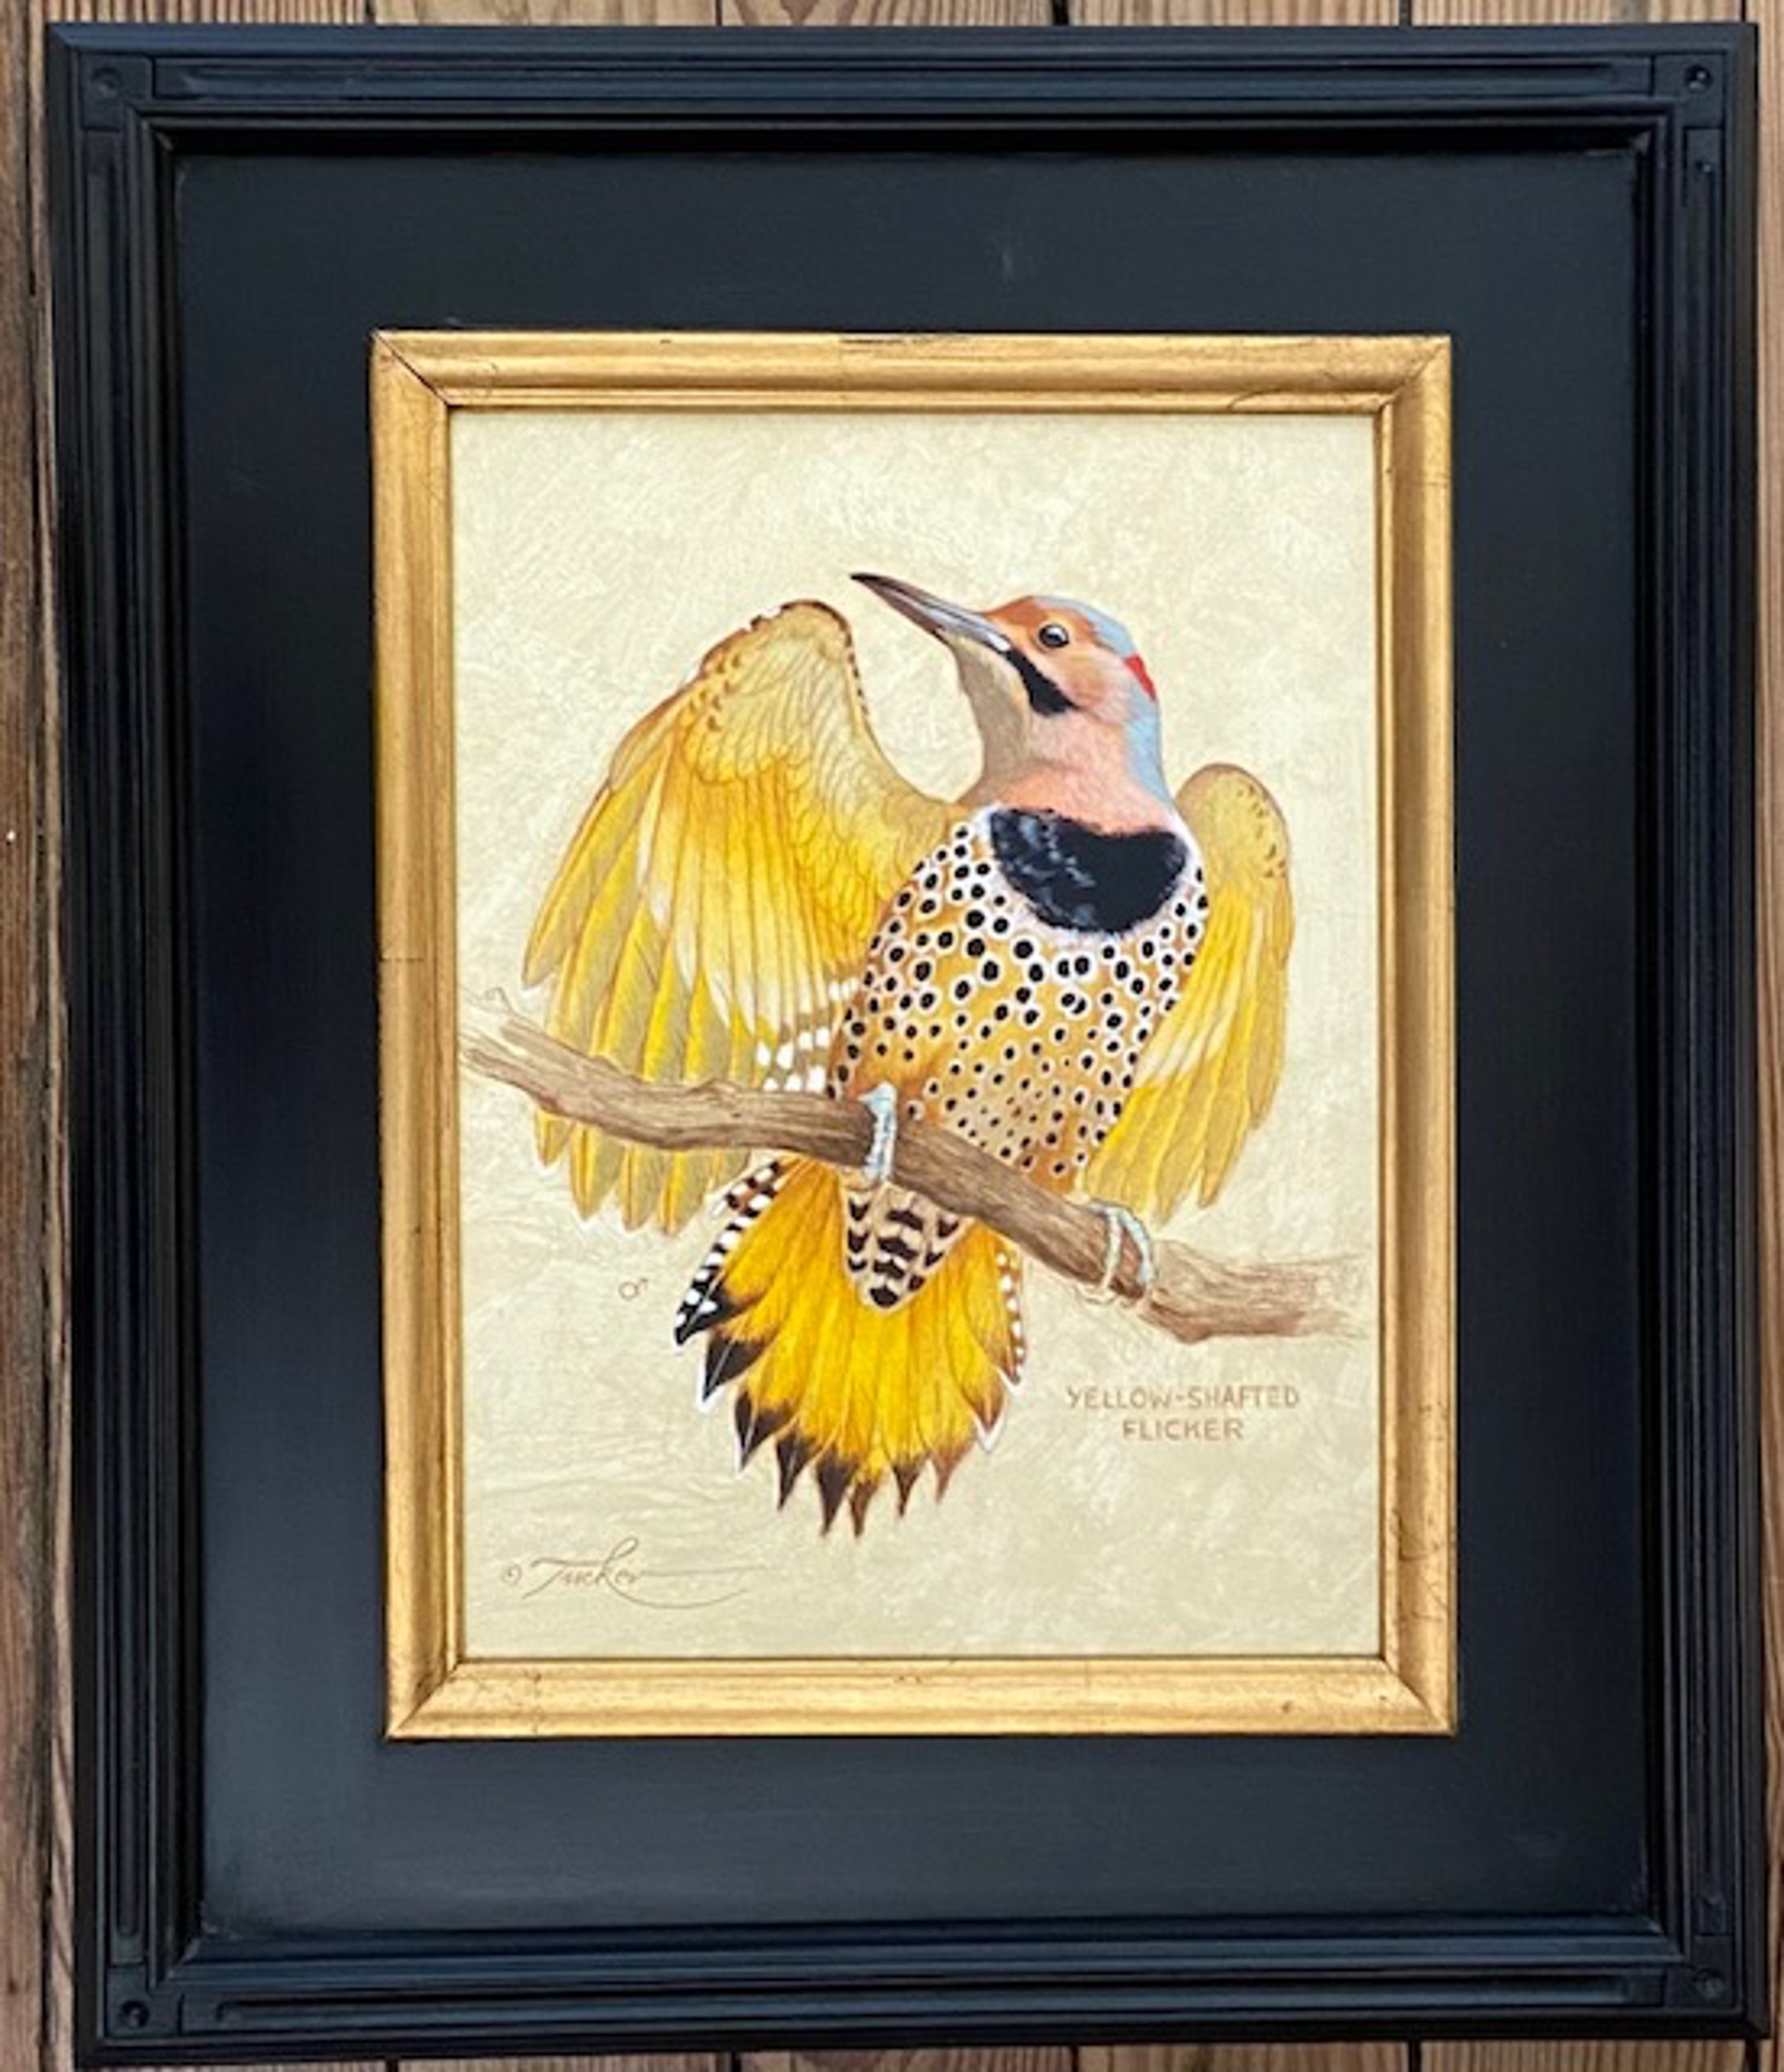 Yellow-Shafted Flicker #1 by Ezra Tucker